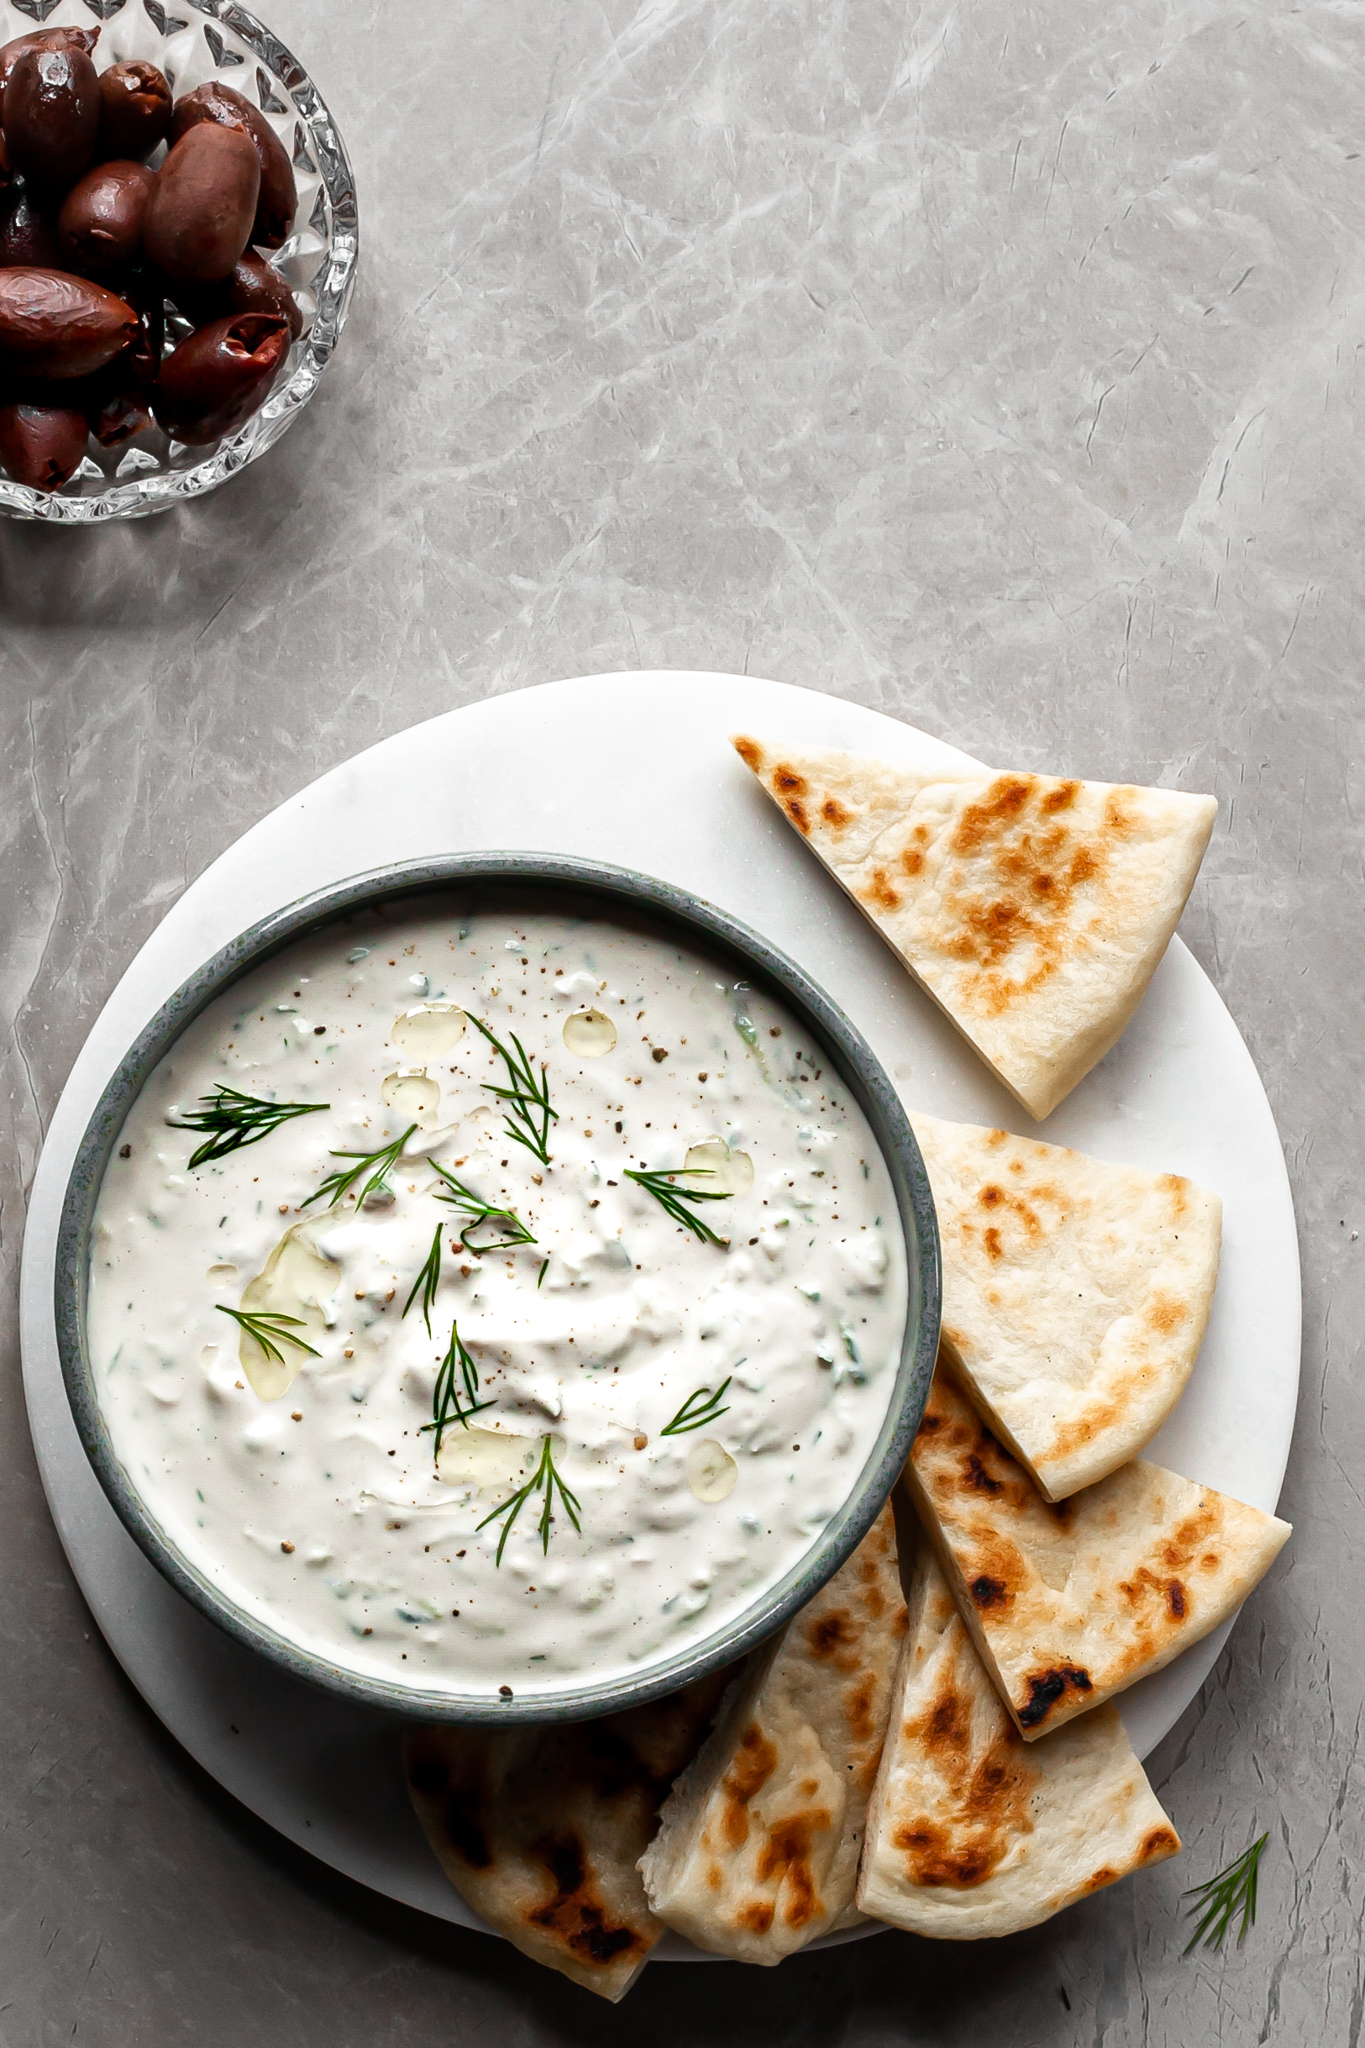 View looking down on a bowl of vegan tzatziki served with flatbread, cucumber slices and black olives